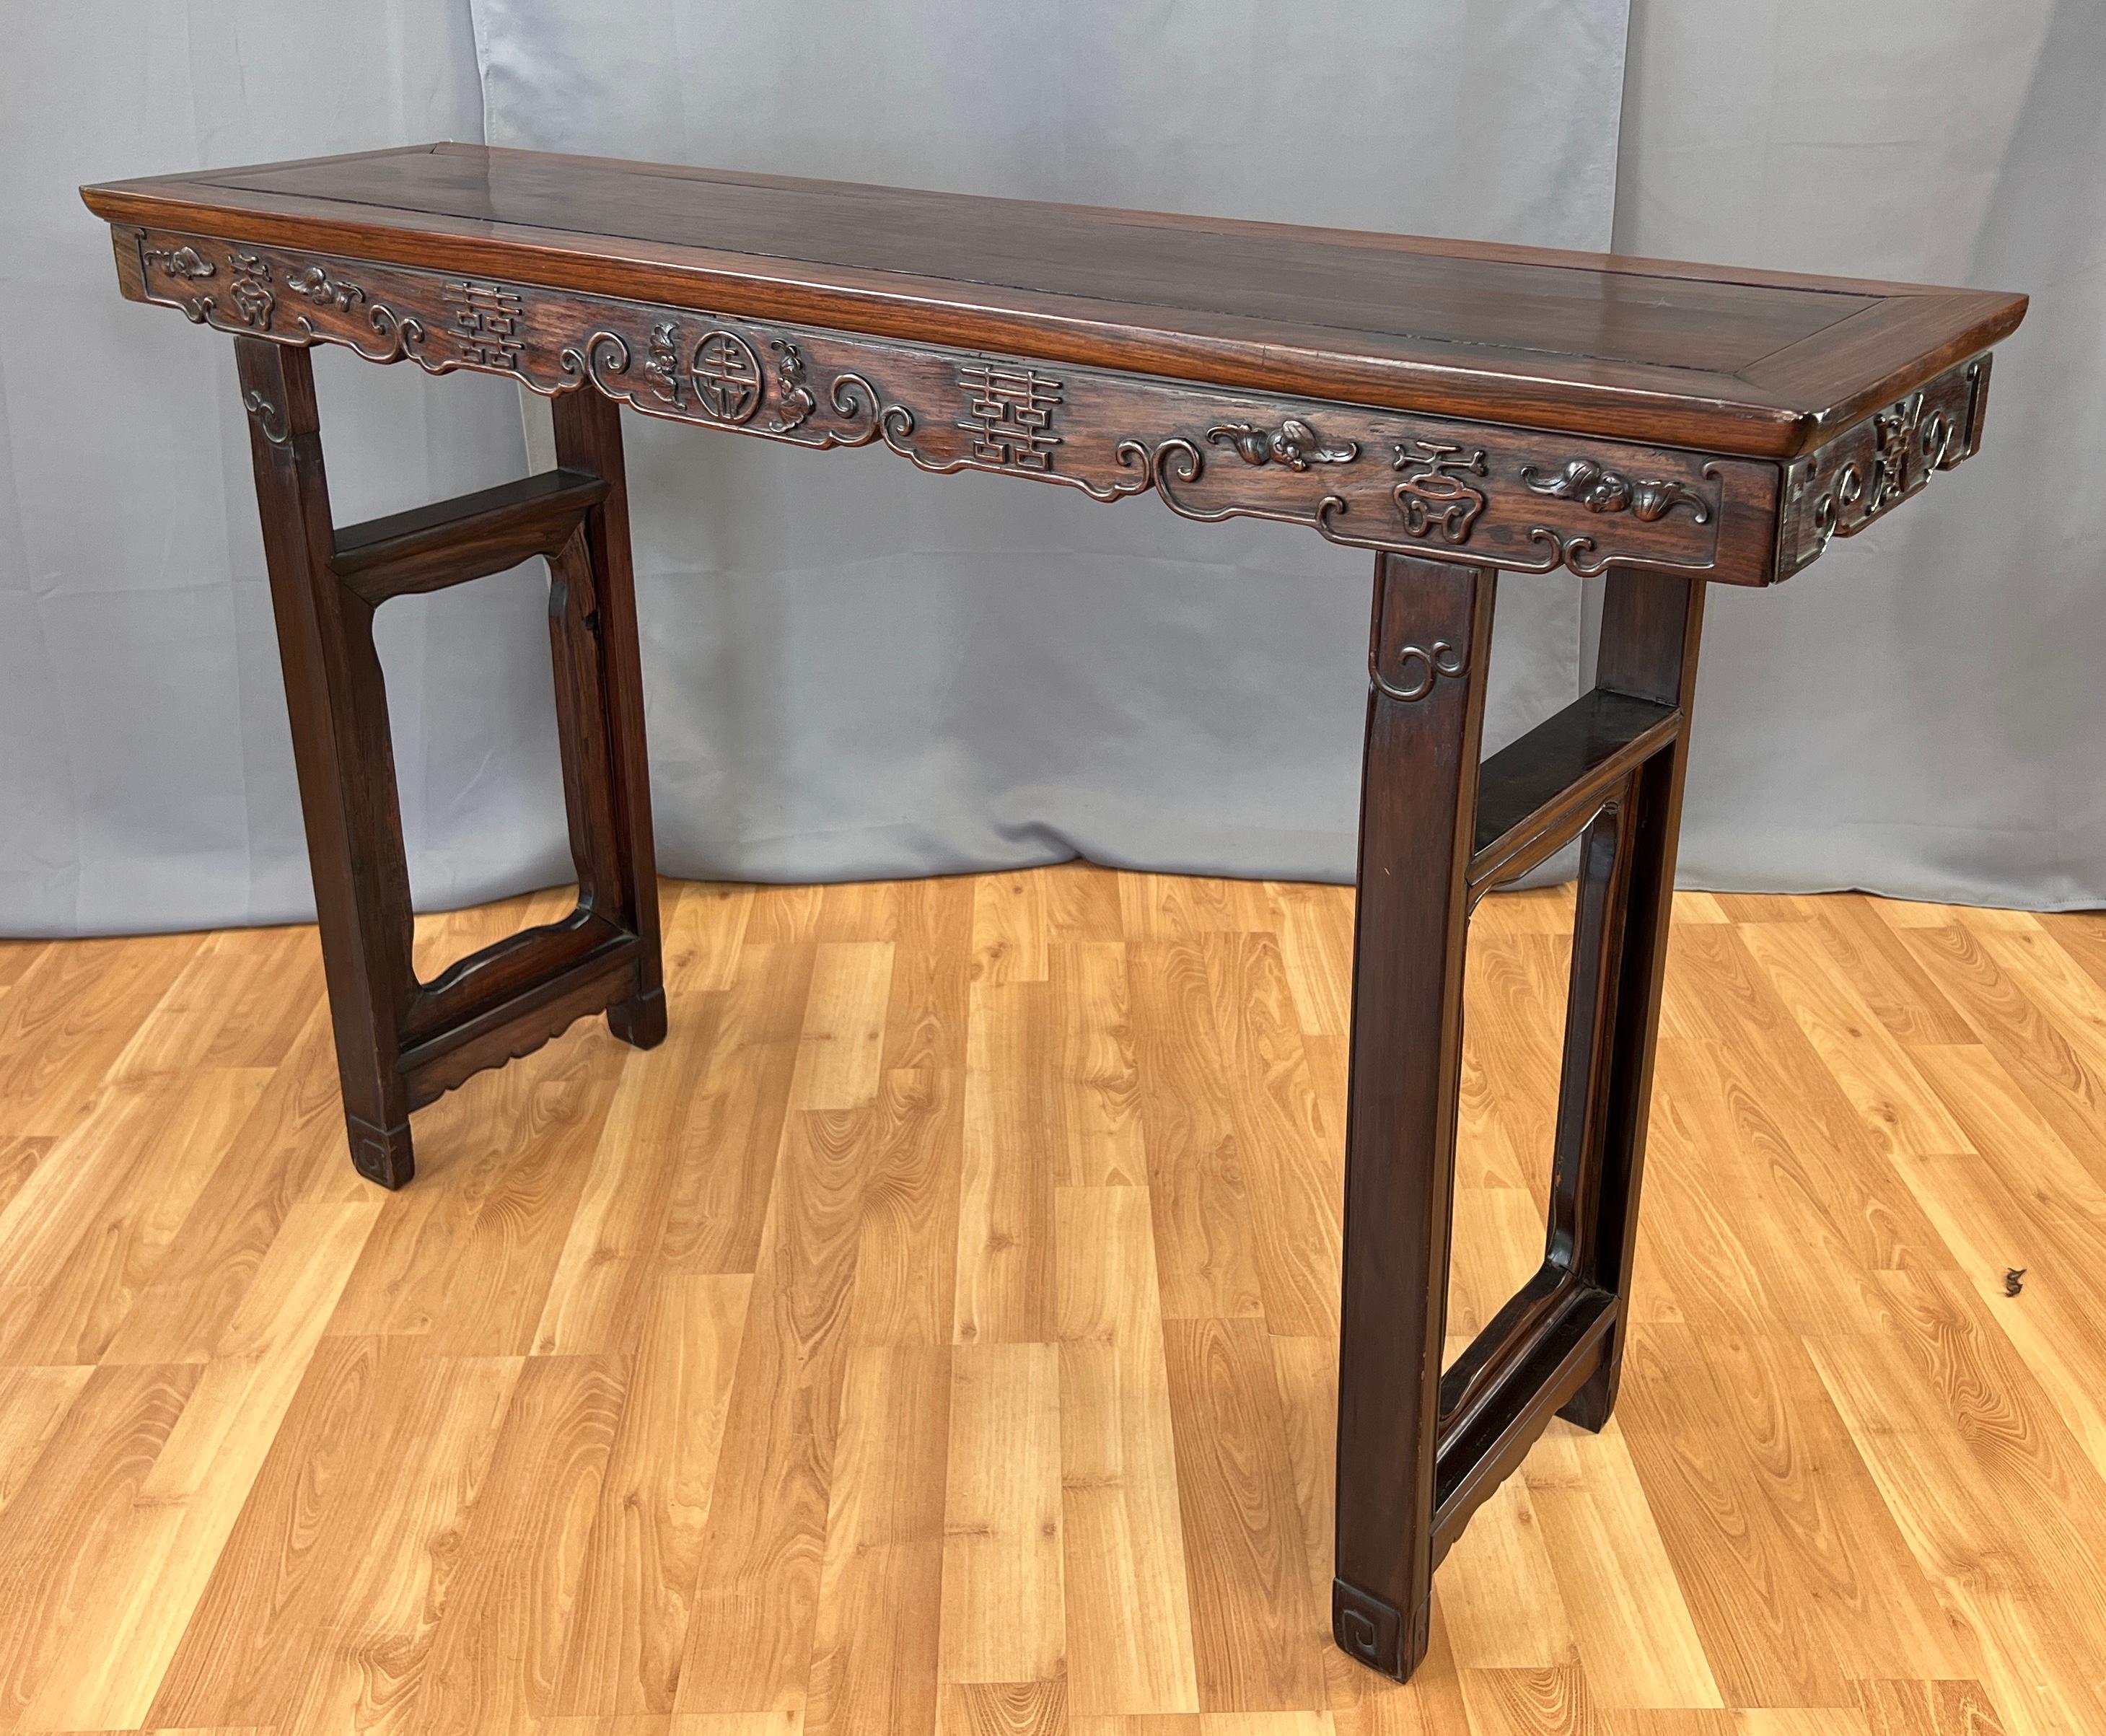 Offered here is a wonderful wooden Chinese Alter table, from the mid 20th century.
Carved on all sides of it's apron, flowers/plants, symbols and words, with some light carving on it's legs. Legs have two cross braces each, and between the legs and